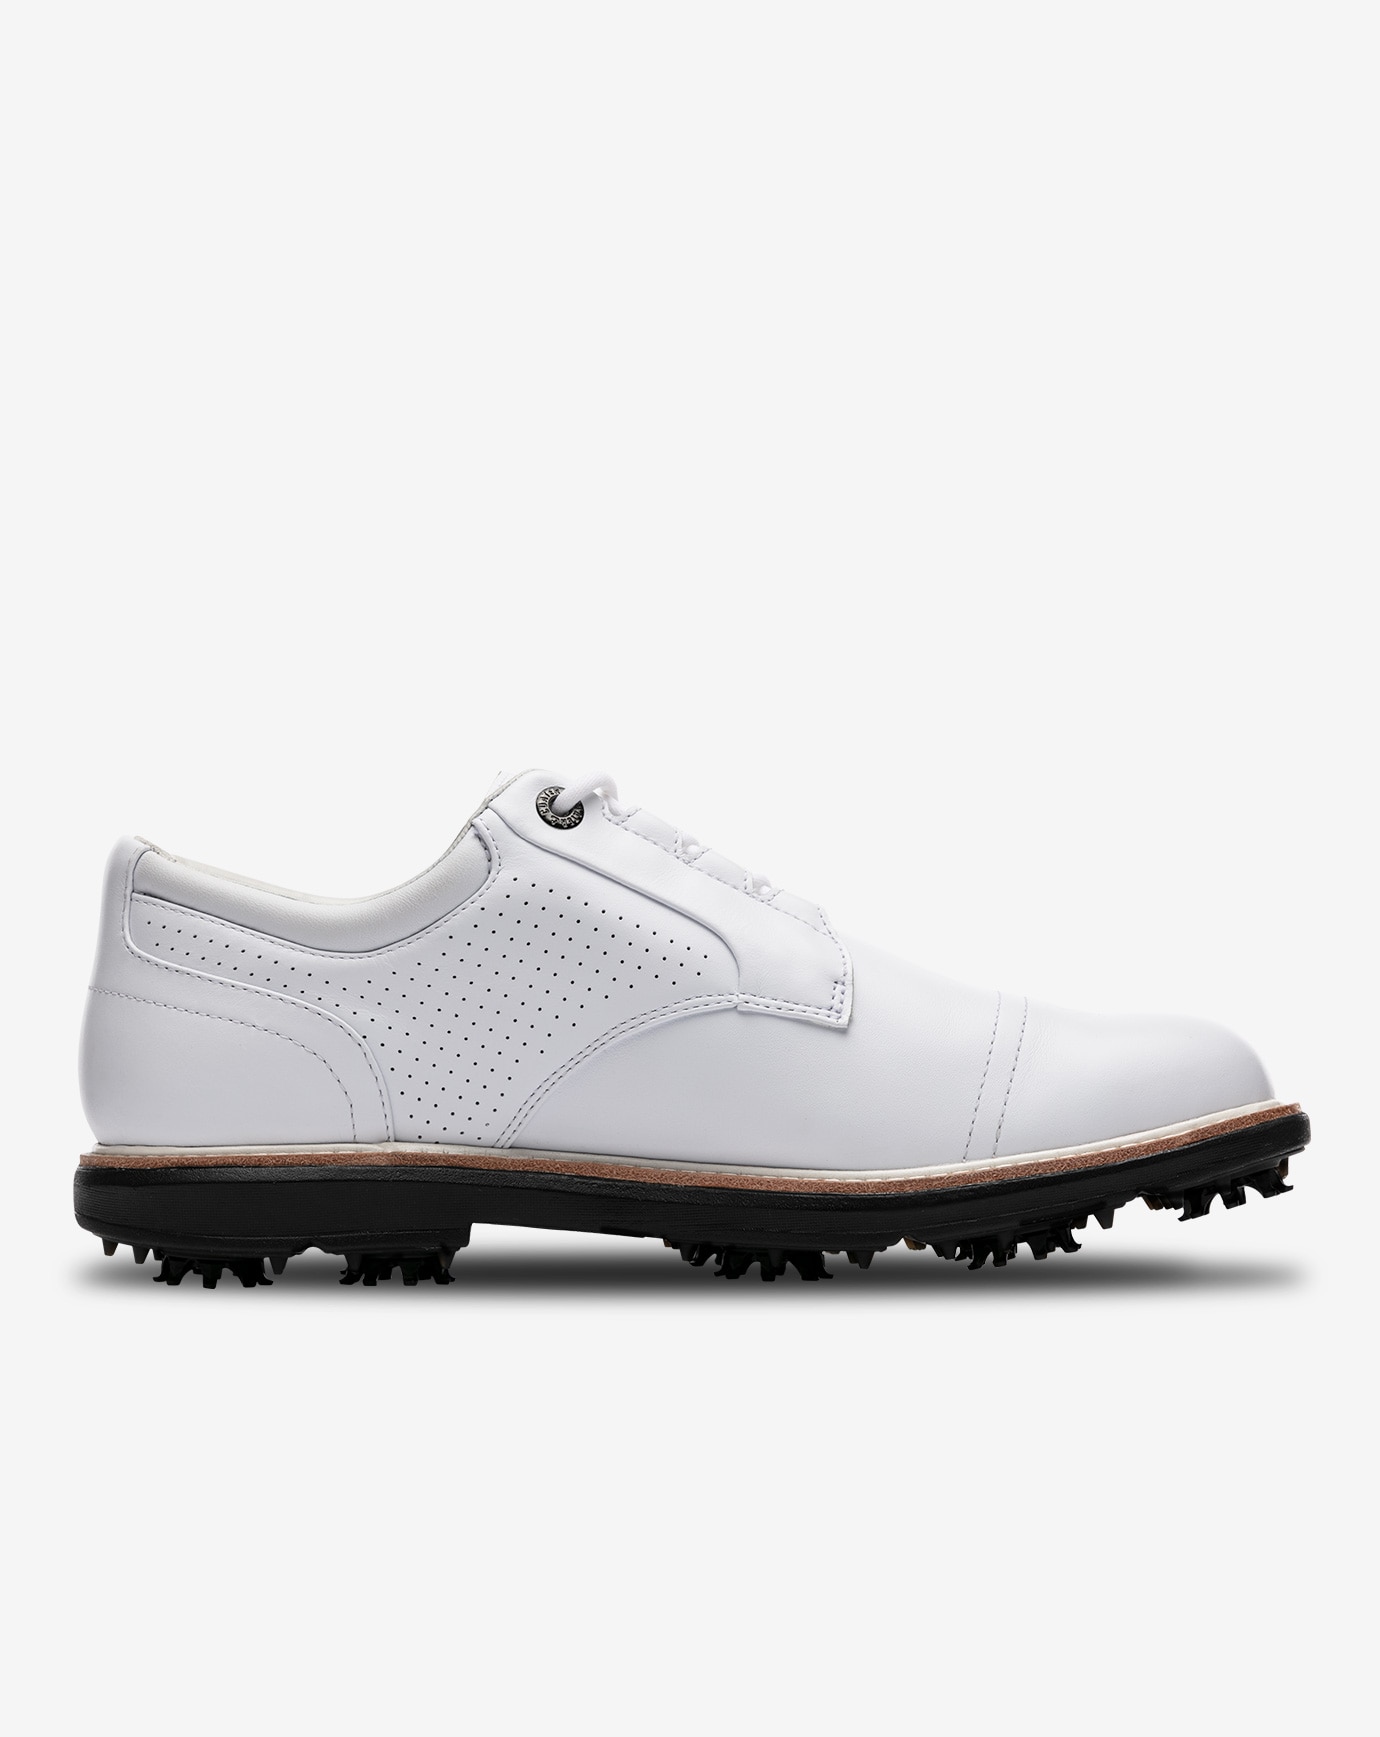 THE LEGEND SPIKED GOLF SHOE Image Thumbnail 3